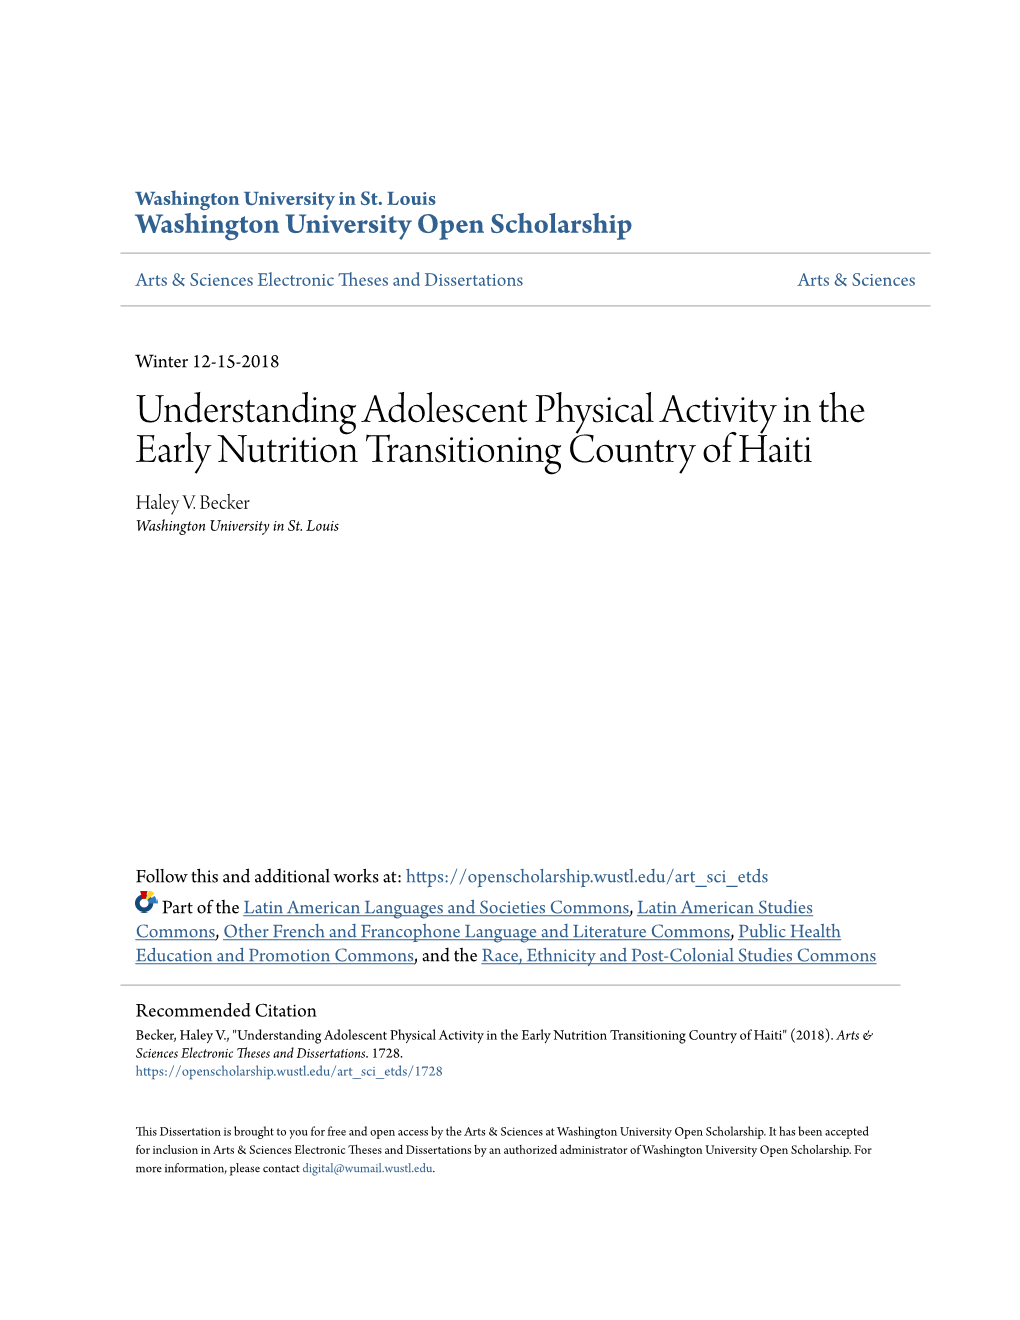 Understanding Adolescent Physical Activity in the Early Nutrition Transitioning Country of Haiti Haley V